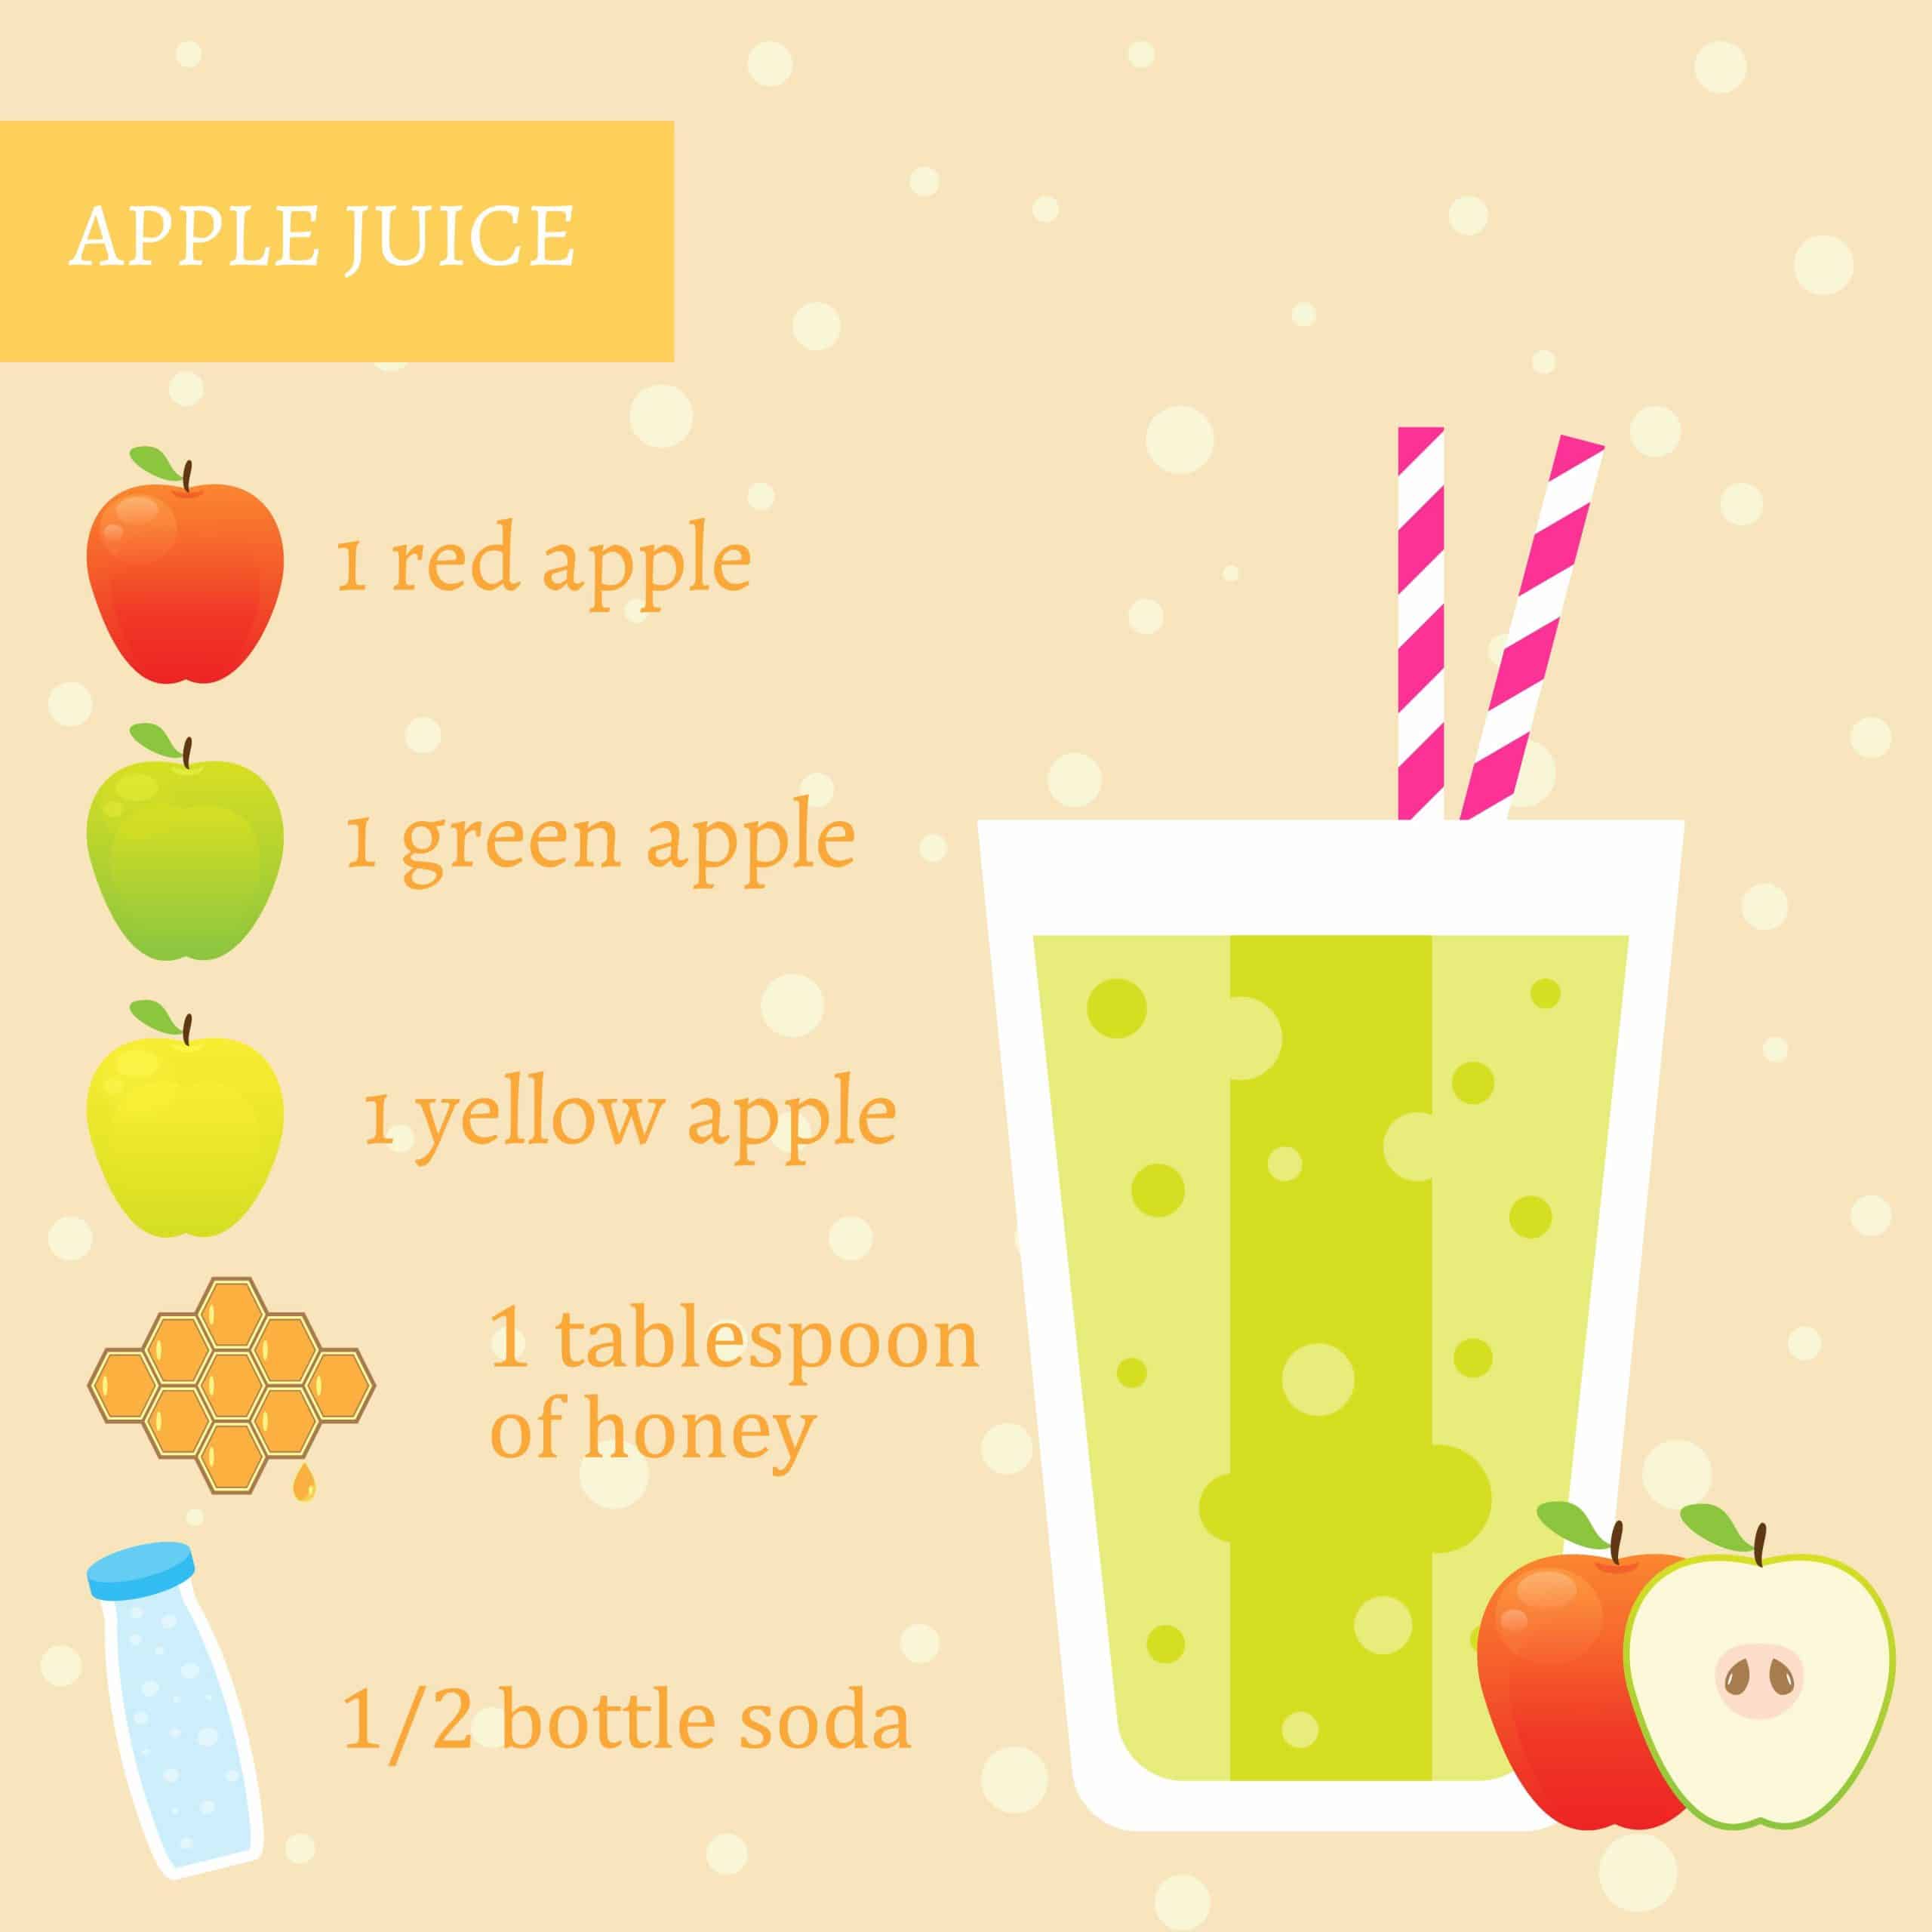 Apple juice is incredibly easy to make at home!